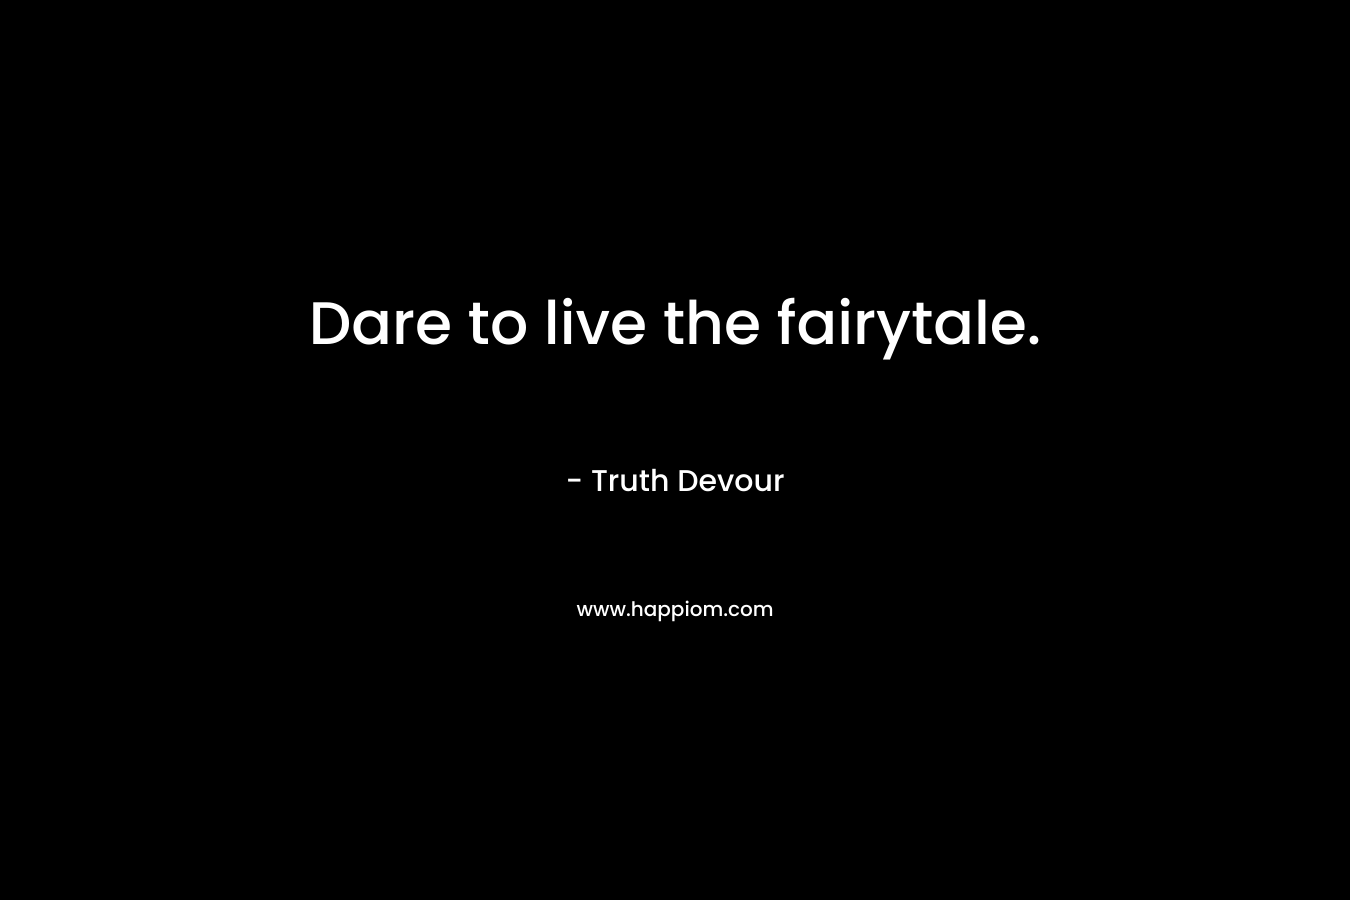 Dare to live the fairytale. – Truth Devour